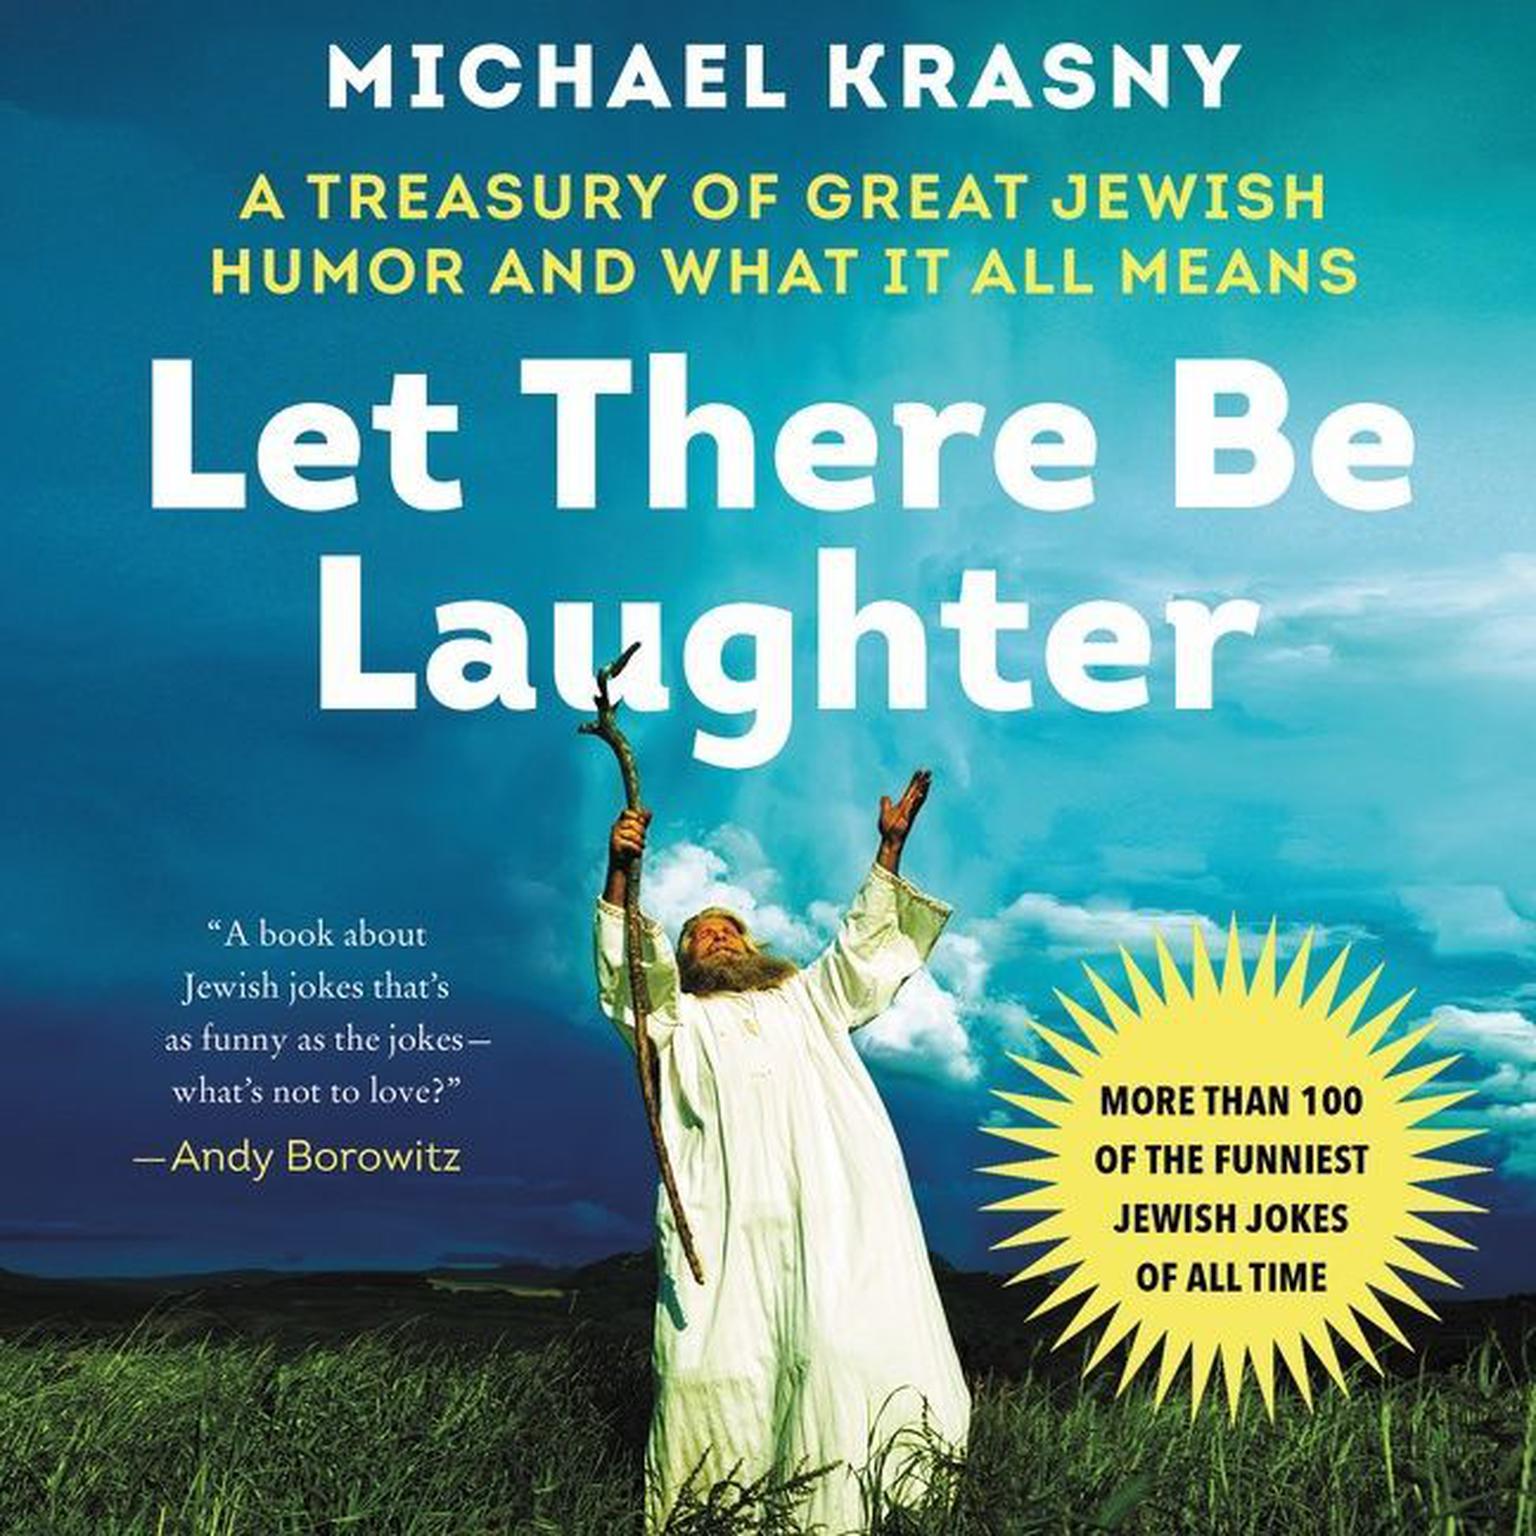 Let There Be Laughter: A Treasury of Great Jewish Humor and What It All Means Audiobook, by Michael Krasny